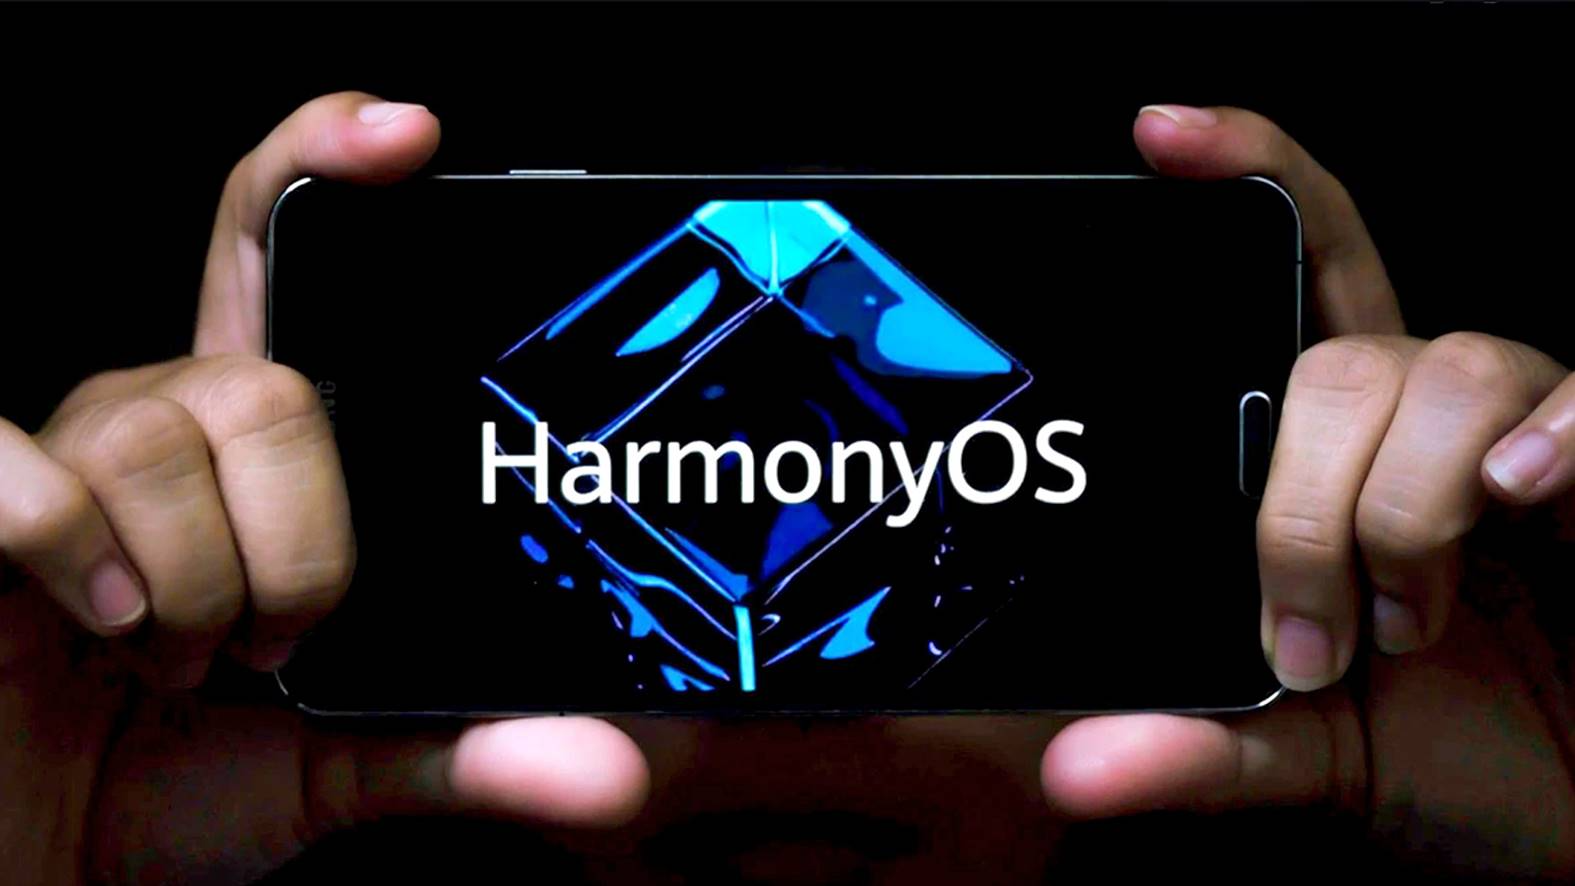 77 Huawei and Honor smartphones received HarmonyOS 2.0